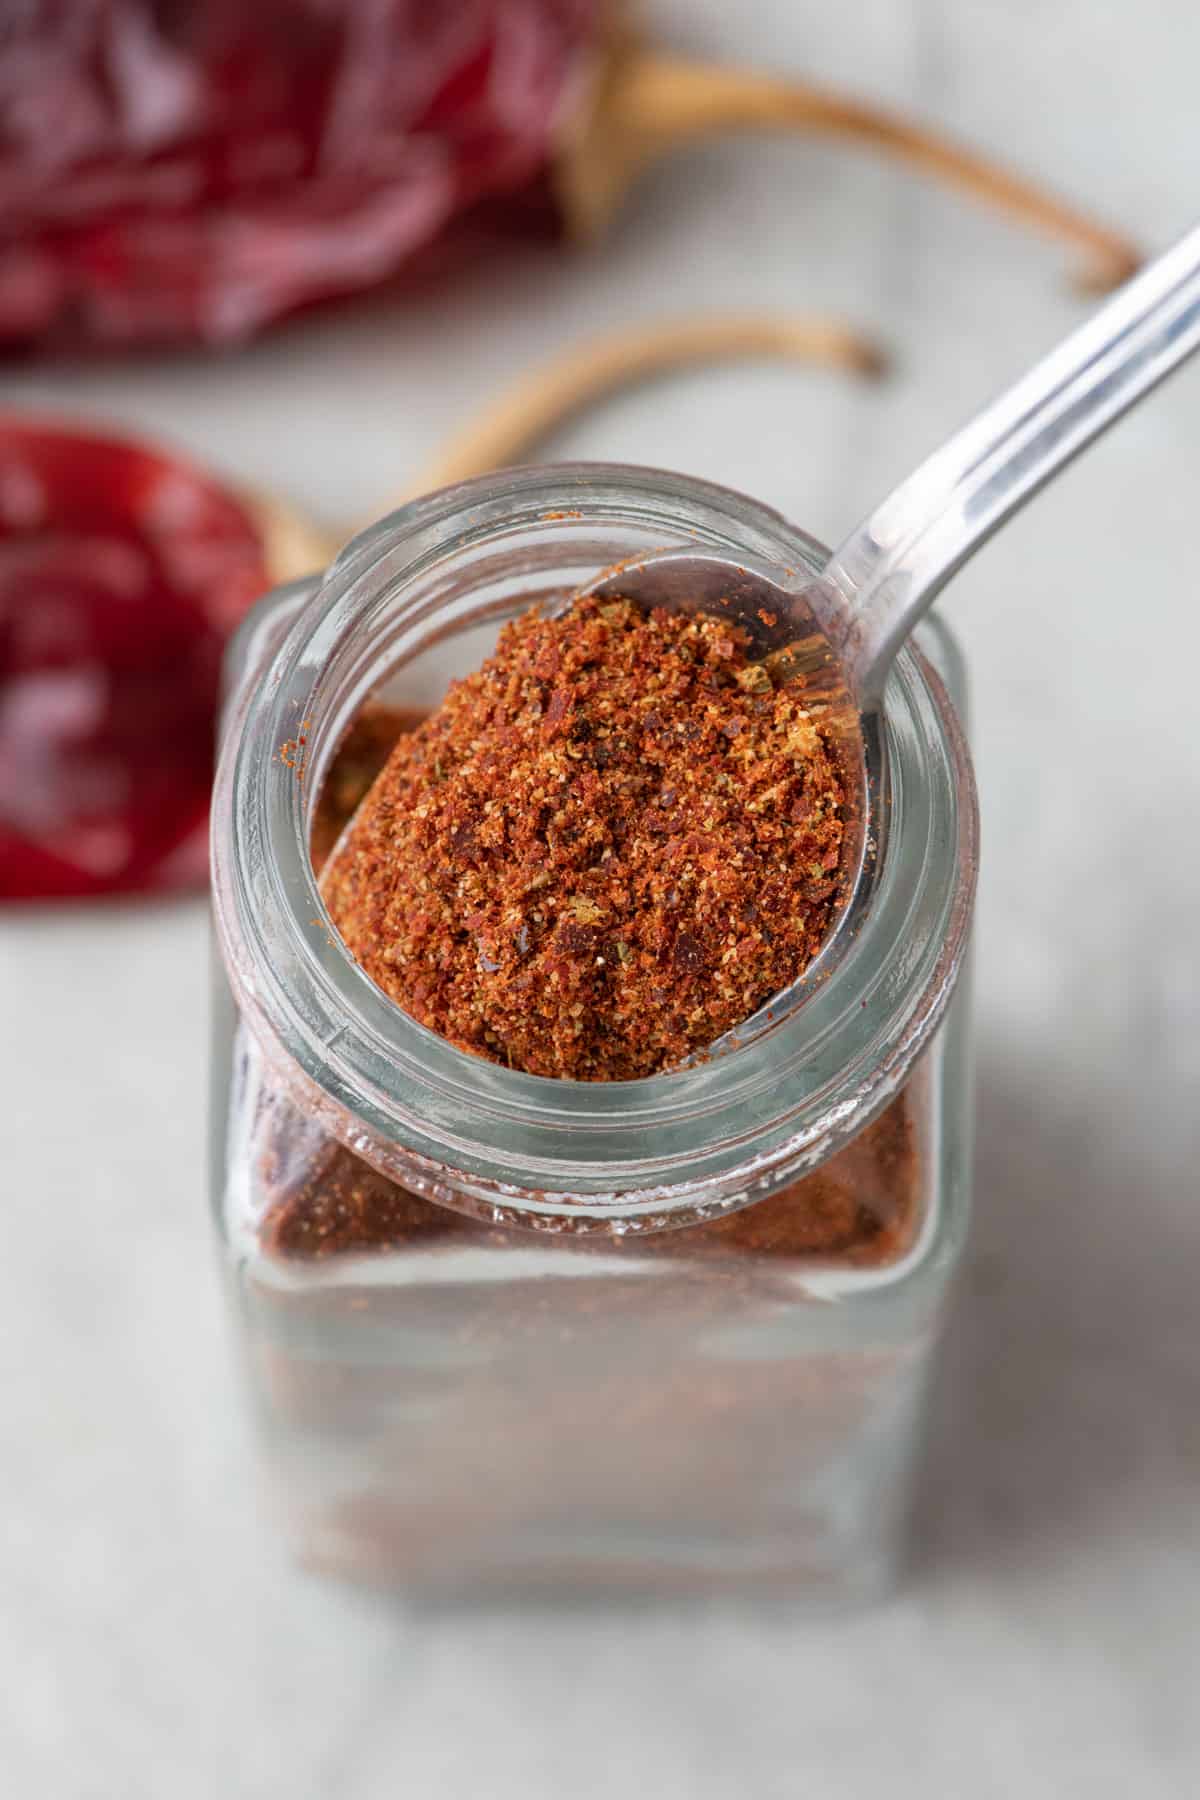 Top down view of a spoon scooping out chili powder from spice jar.